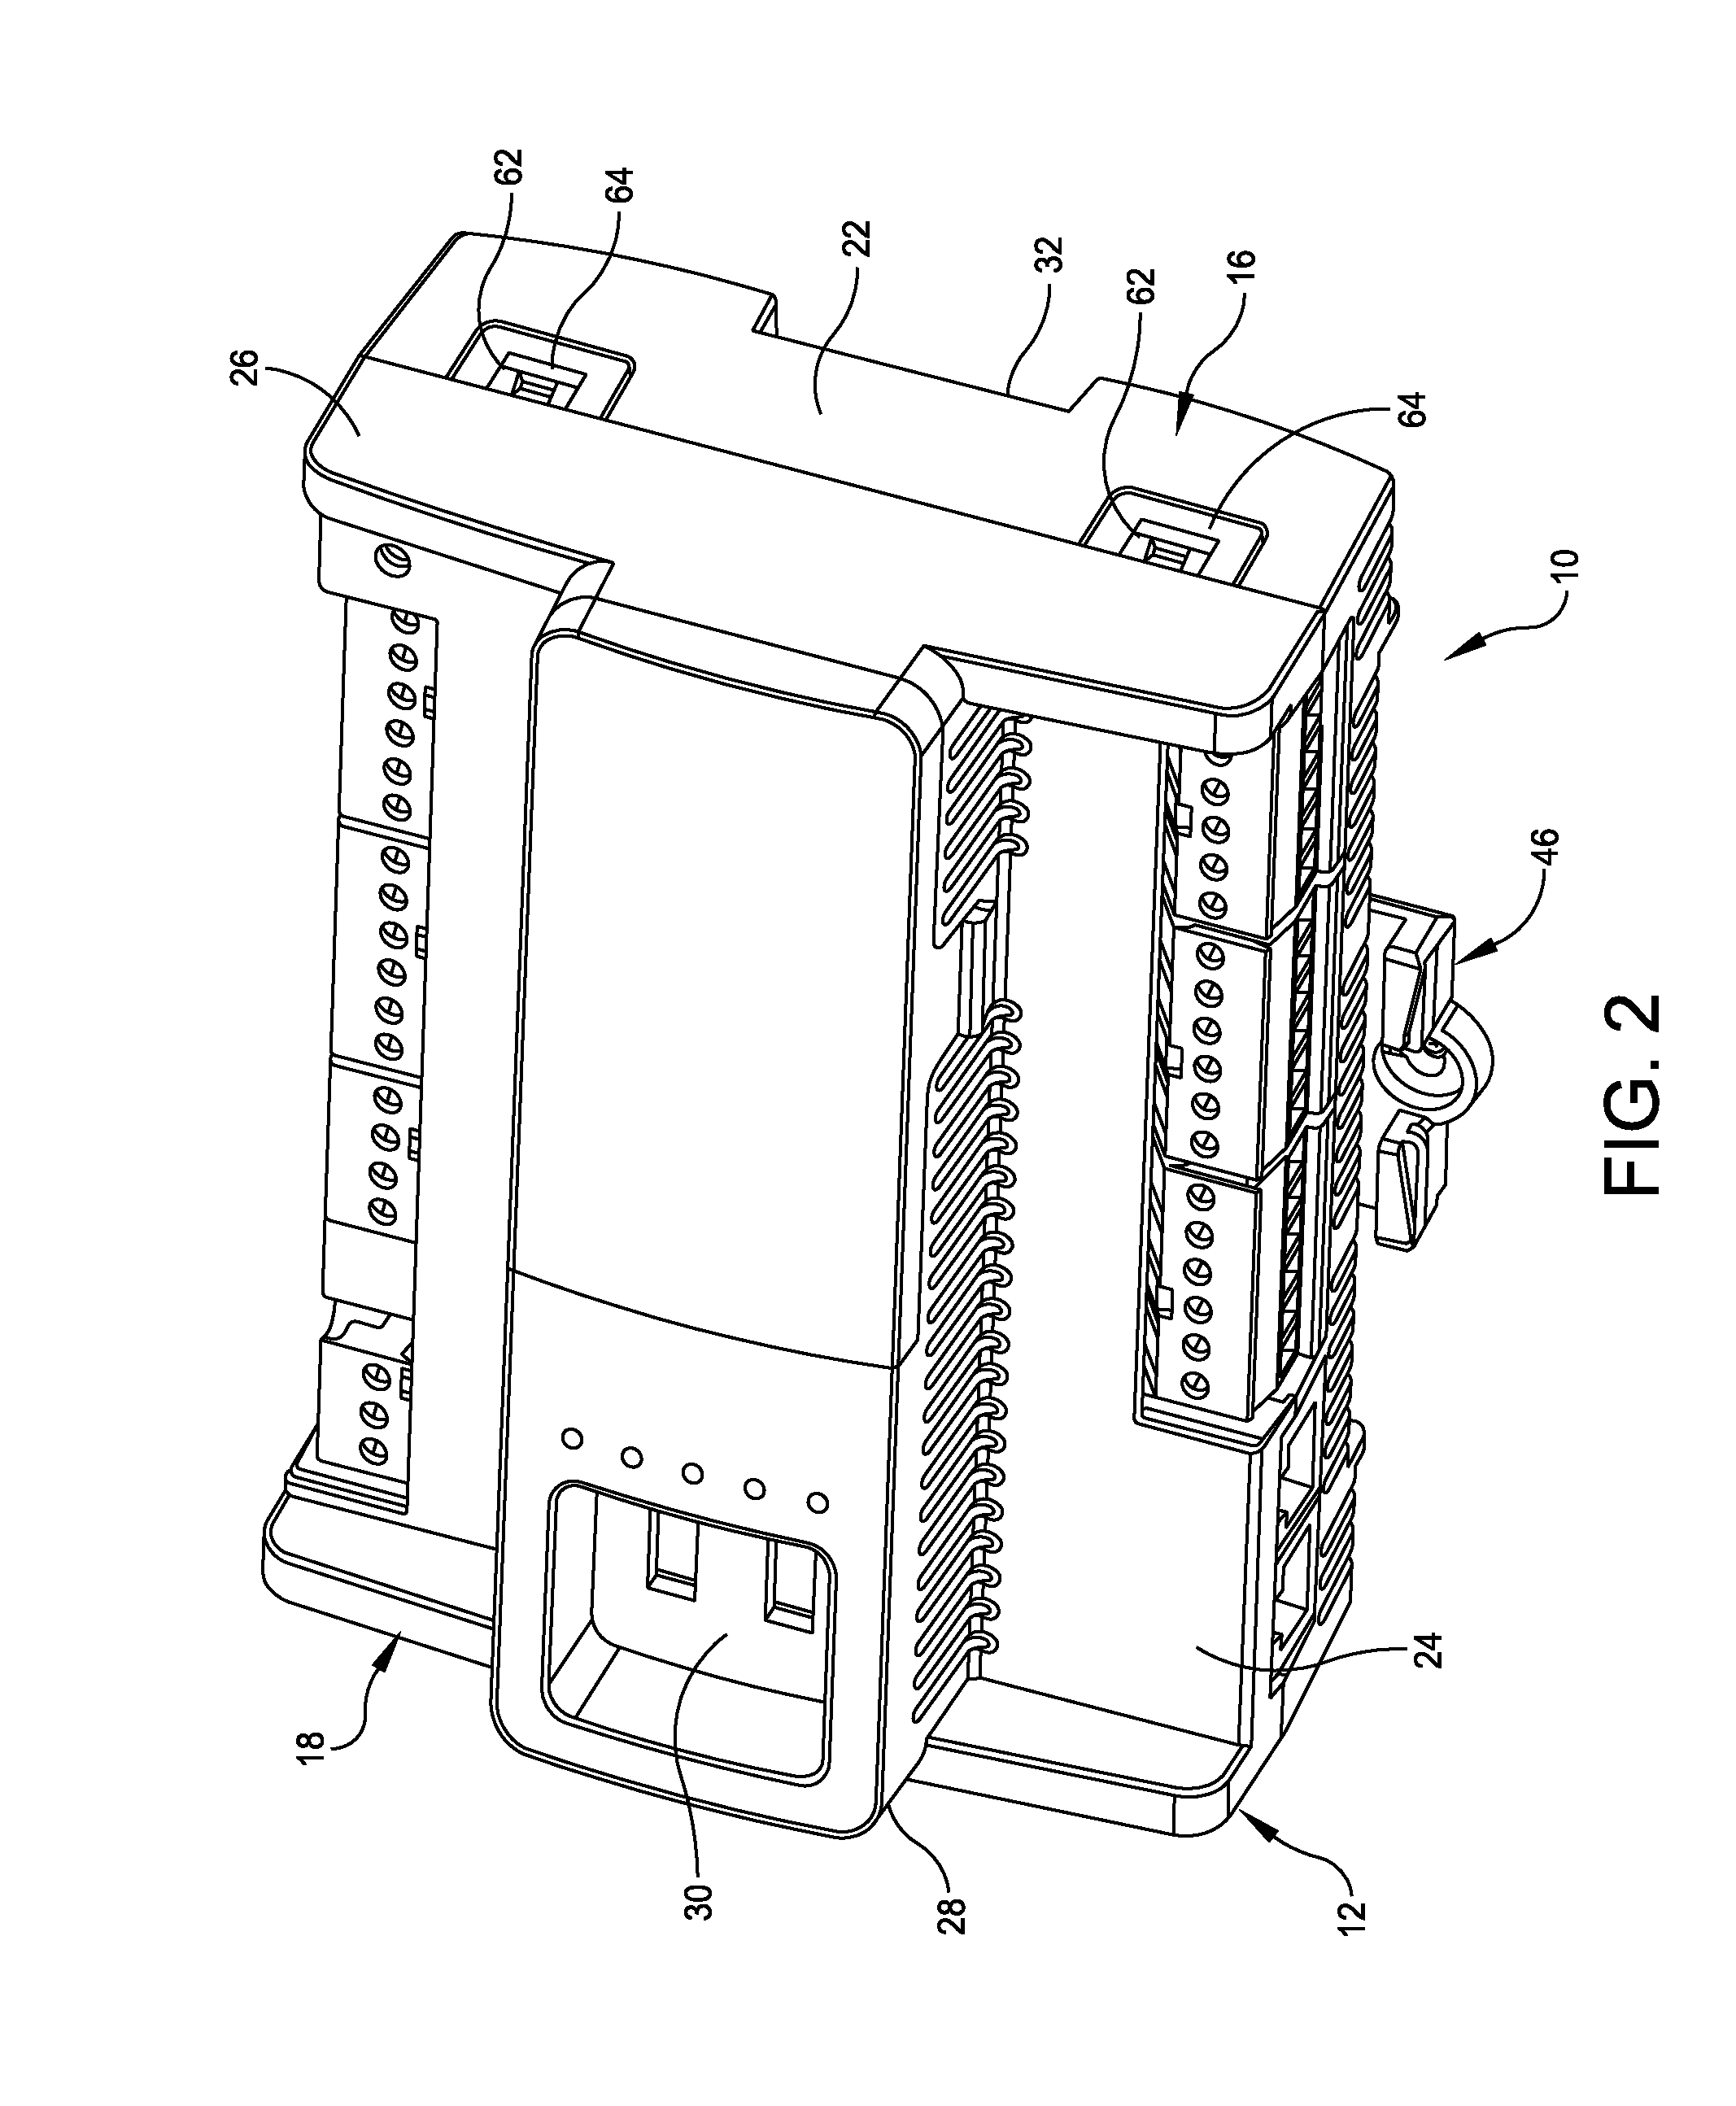 Din rail mounted enclosure assembly and method of use